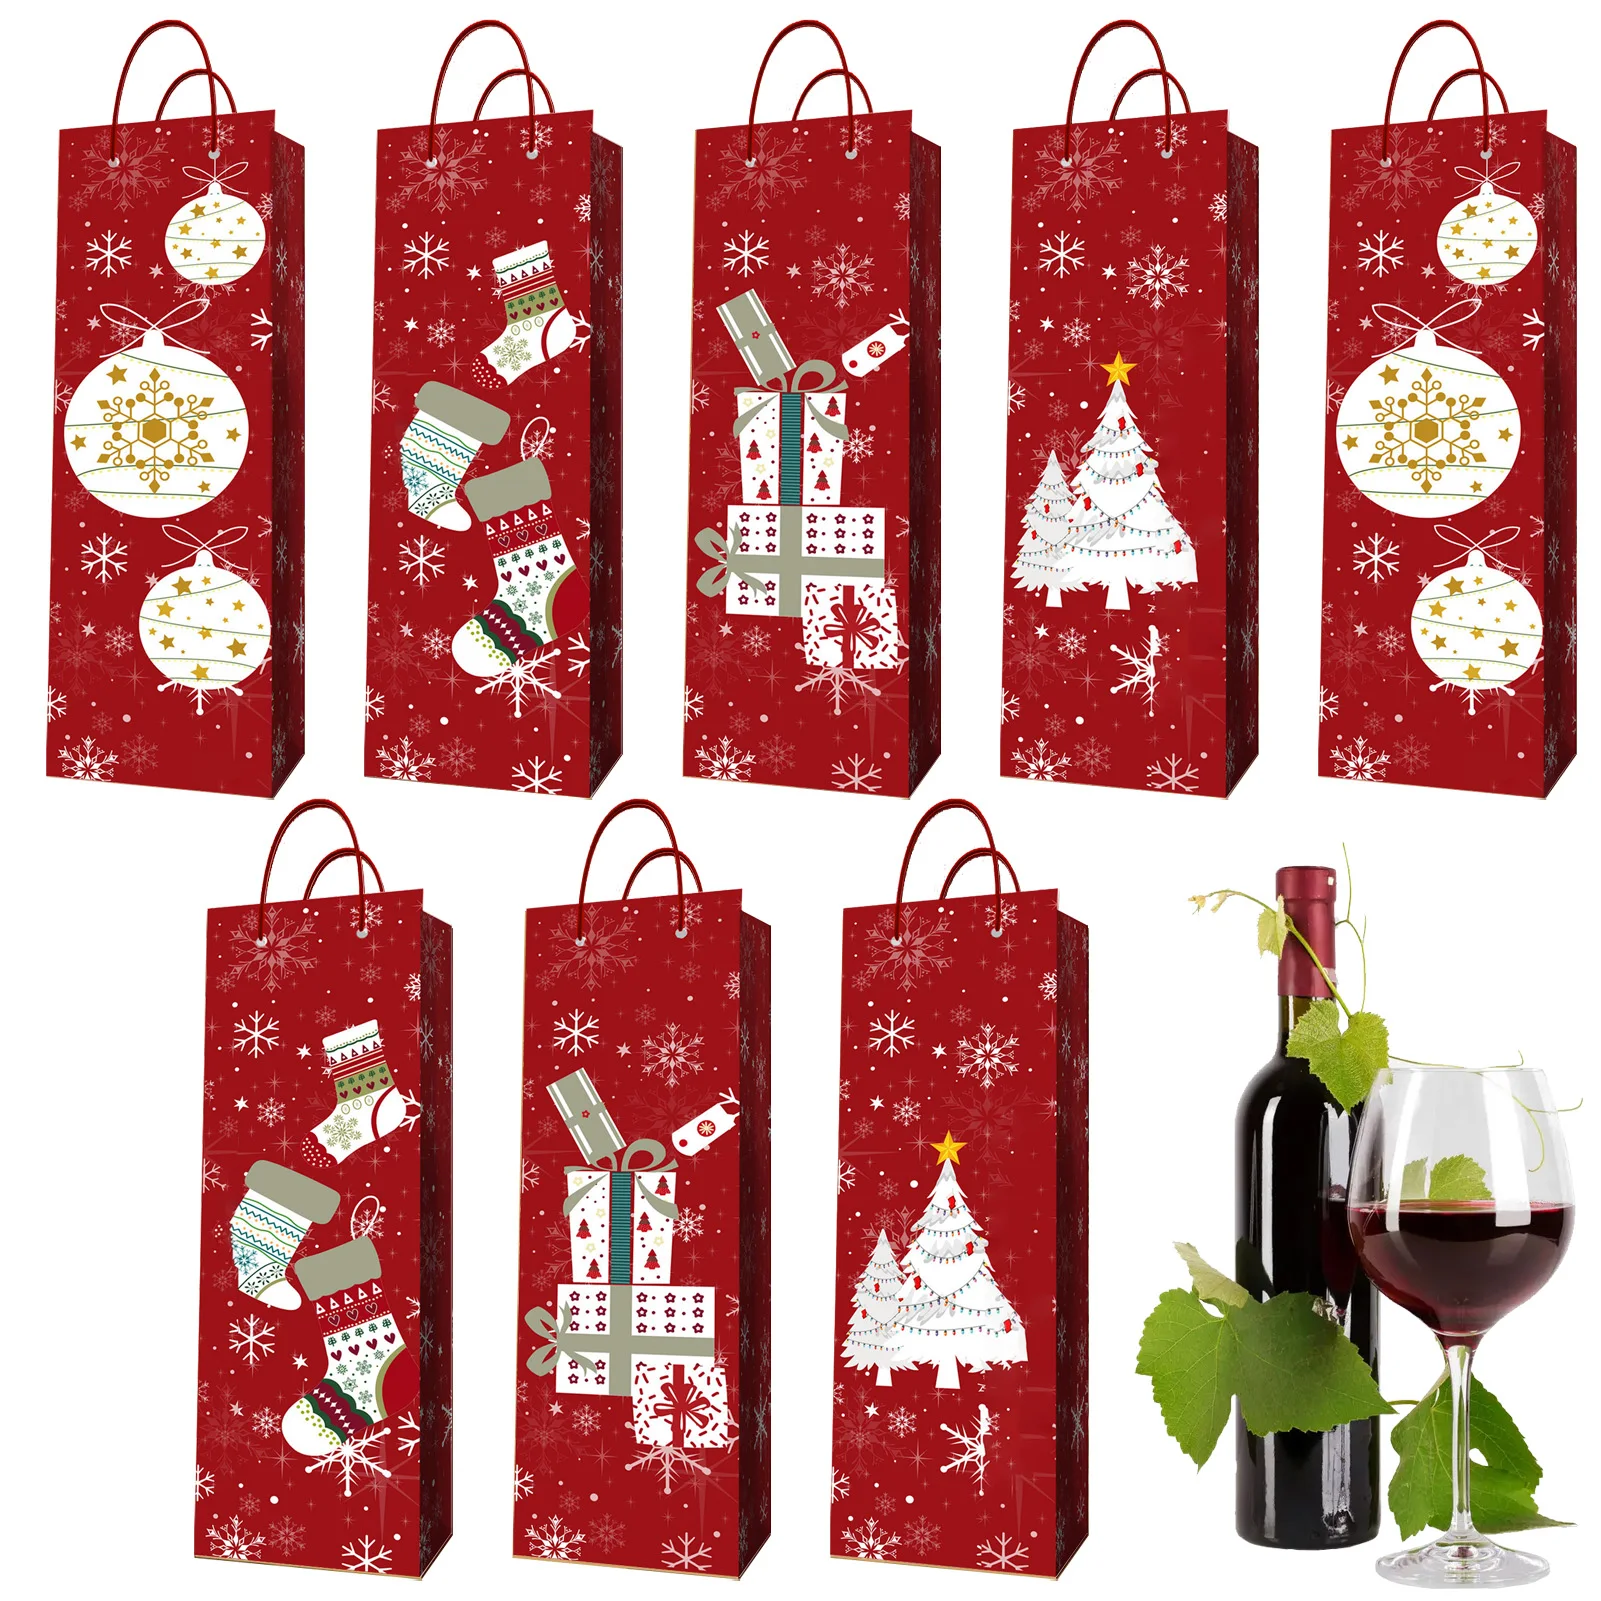 

Christmas Wine Bottle Gift Bags 8pcs Christmas Champagne Wine Bottle Gift Bags With Handles Christmas Paper Wine Bags For Xmas